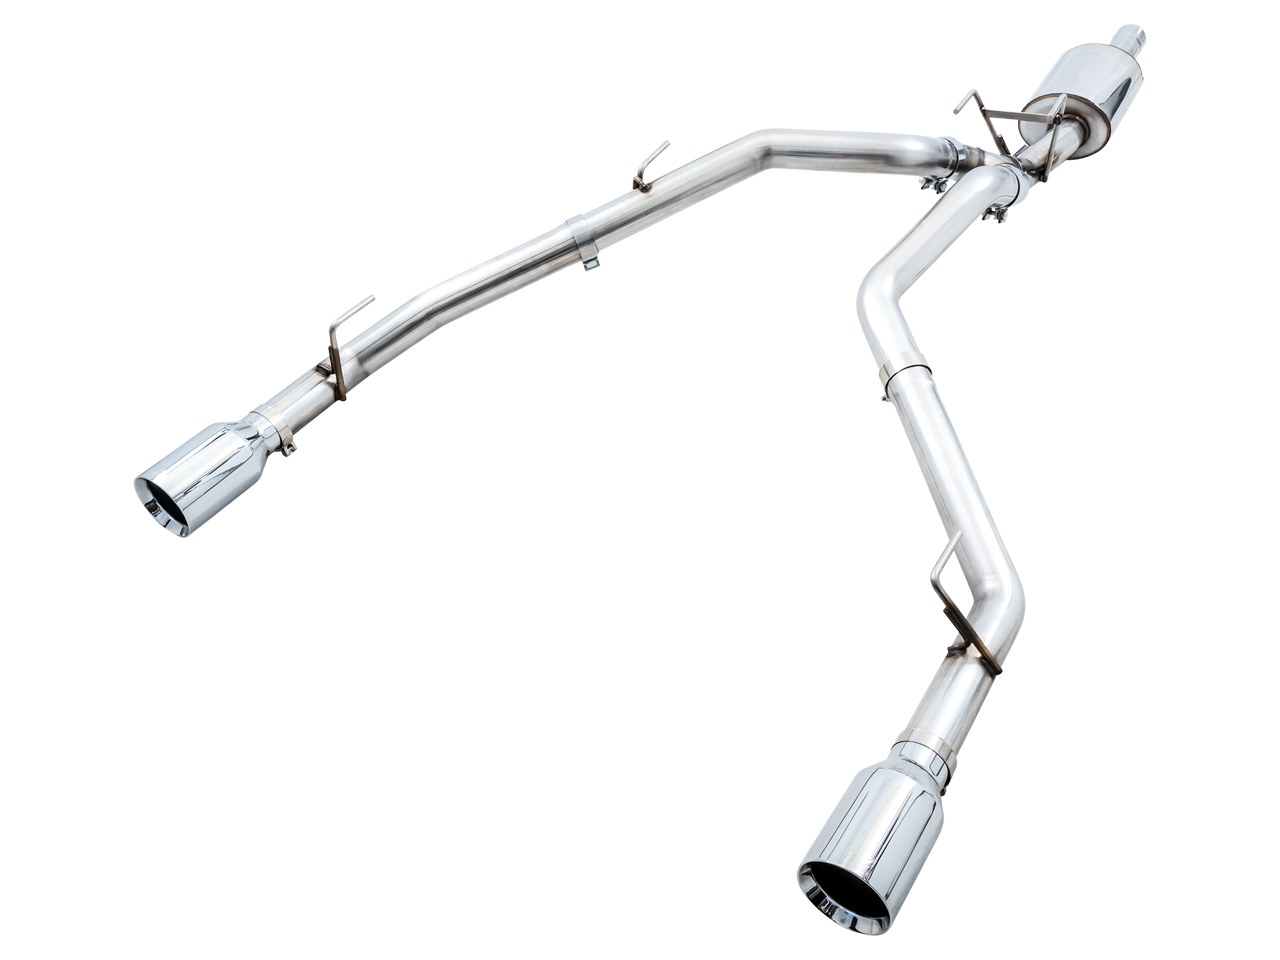 AWE 0FG Dual Rear Exit Catback Exhaust for 4th Gen RAM 1500 5.7L (without bumper cutouts) - Chrome Silver Tips (3015-32101)